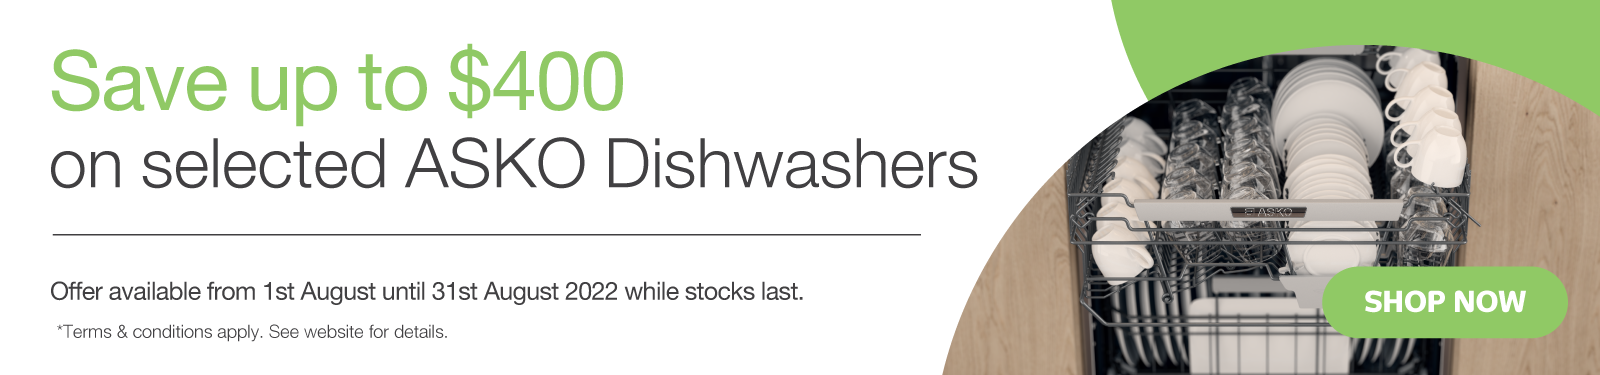 Save Up To $400 On Selected ASKO Dishwashers